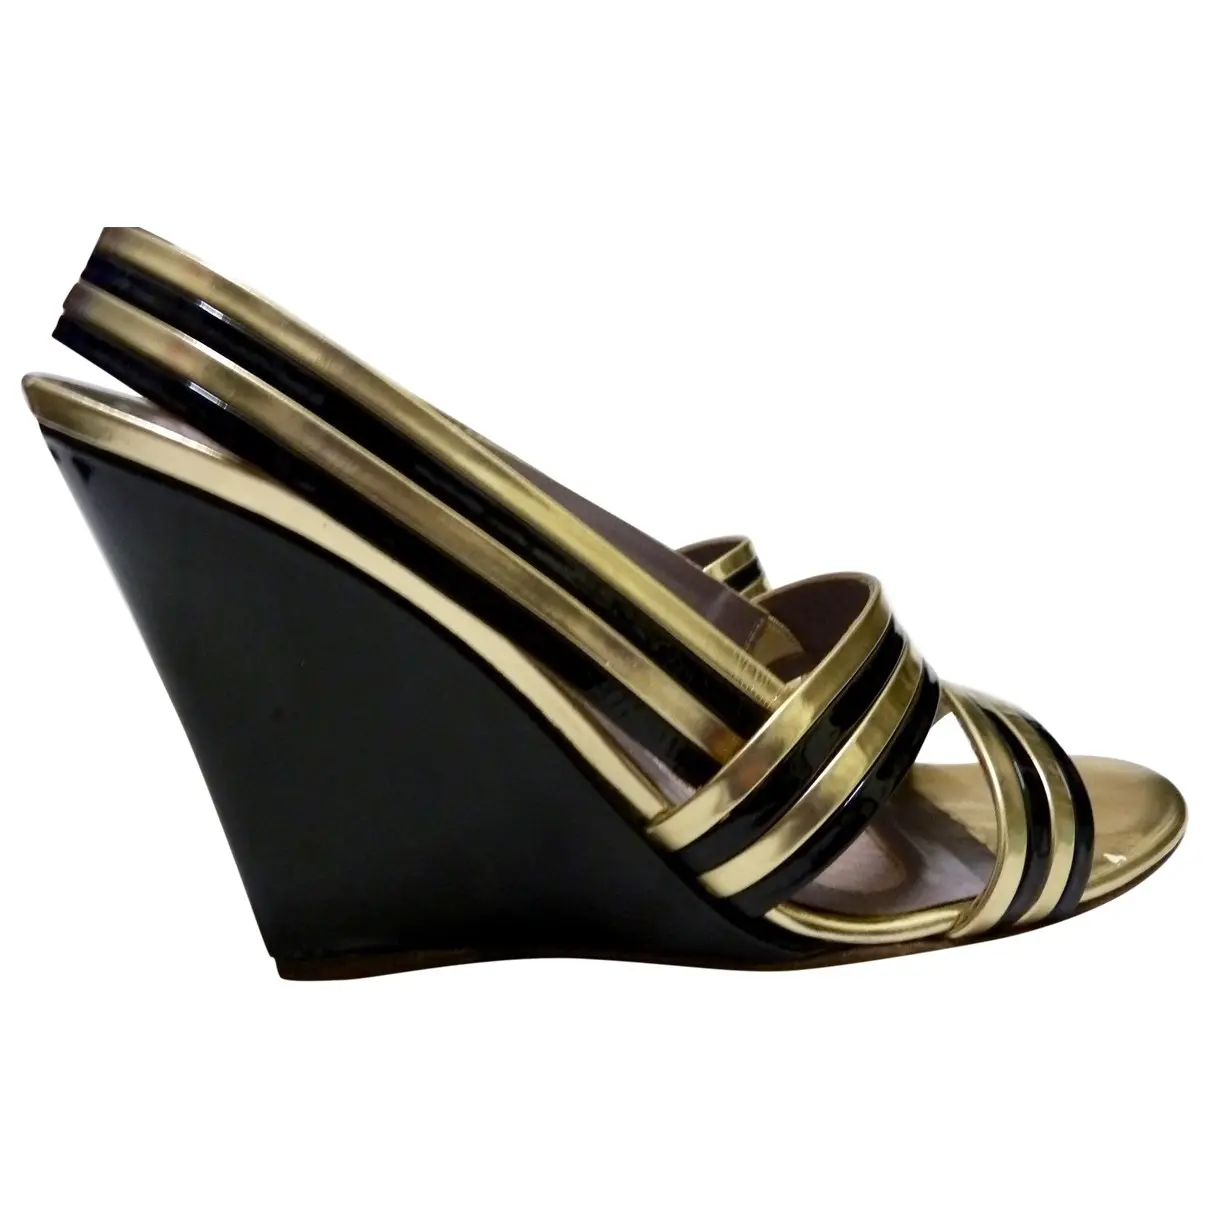 Patent leather sandals Anya Hindmarch